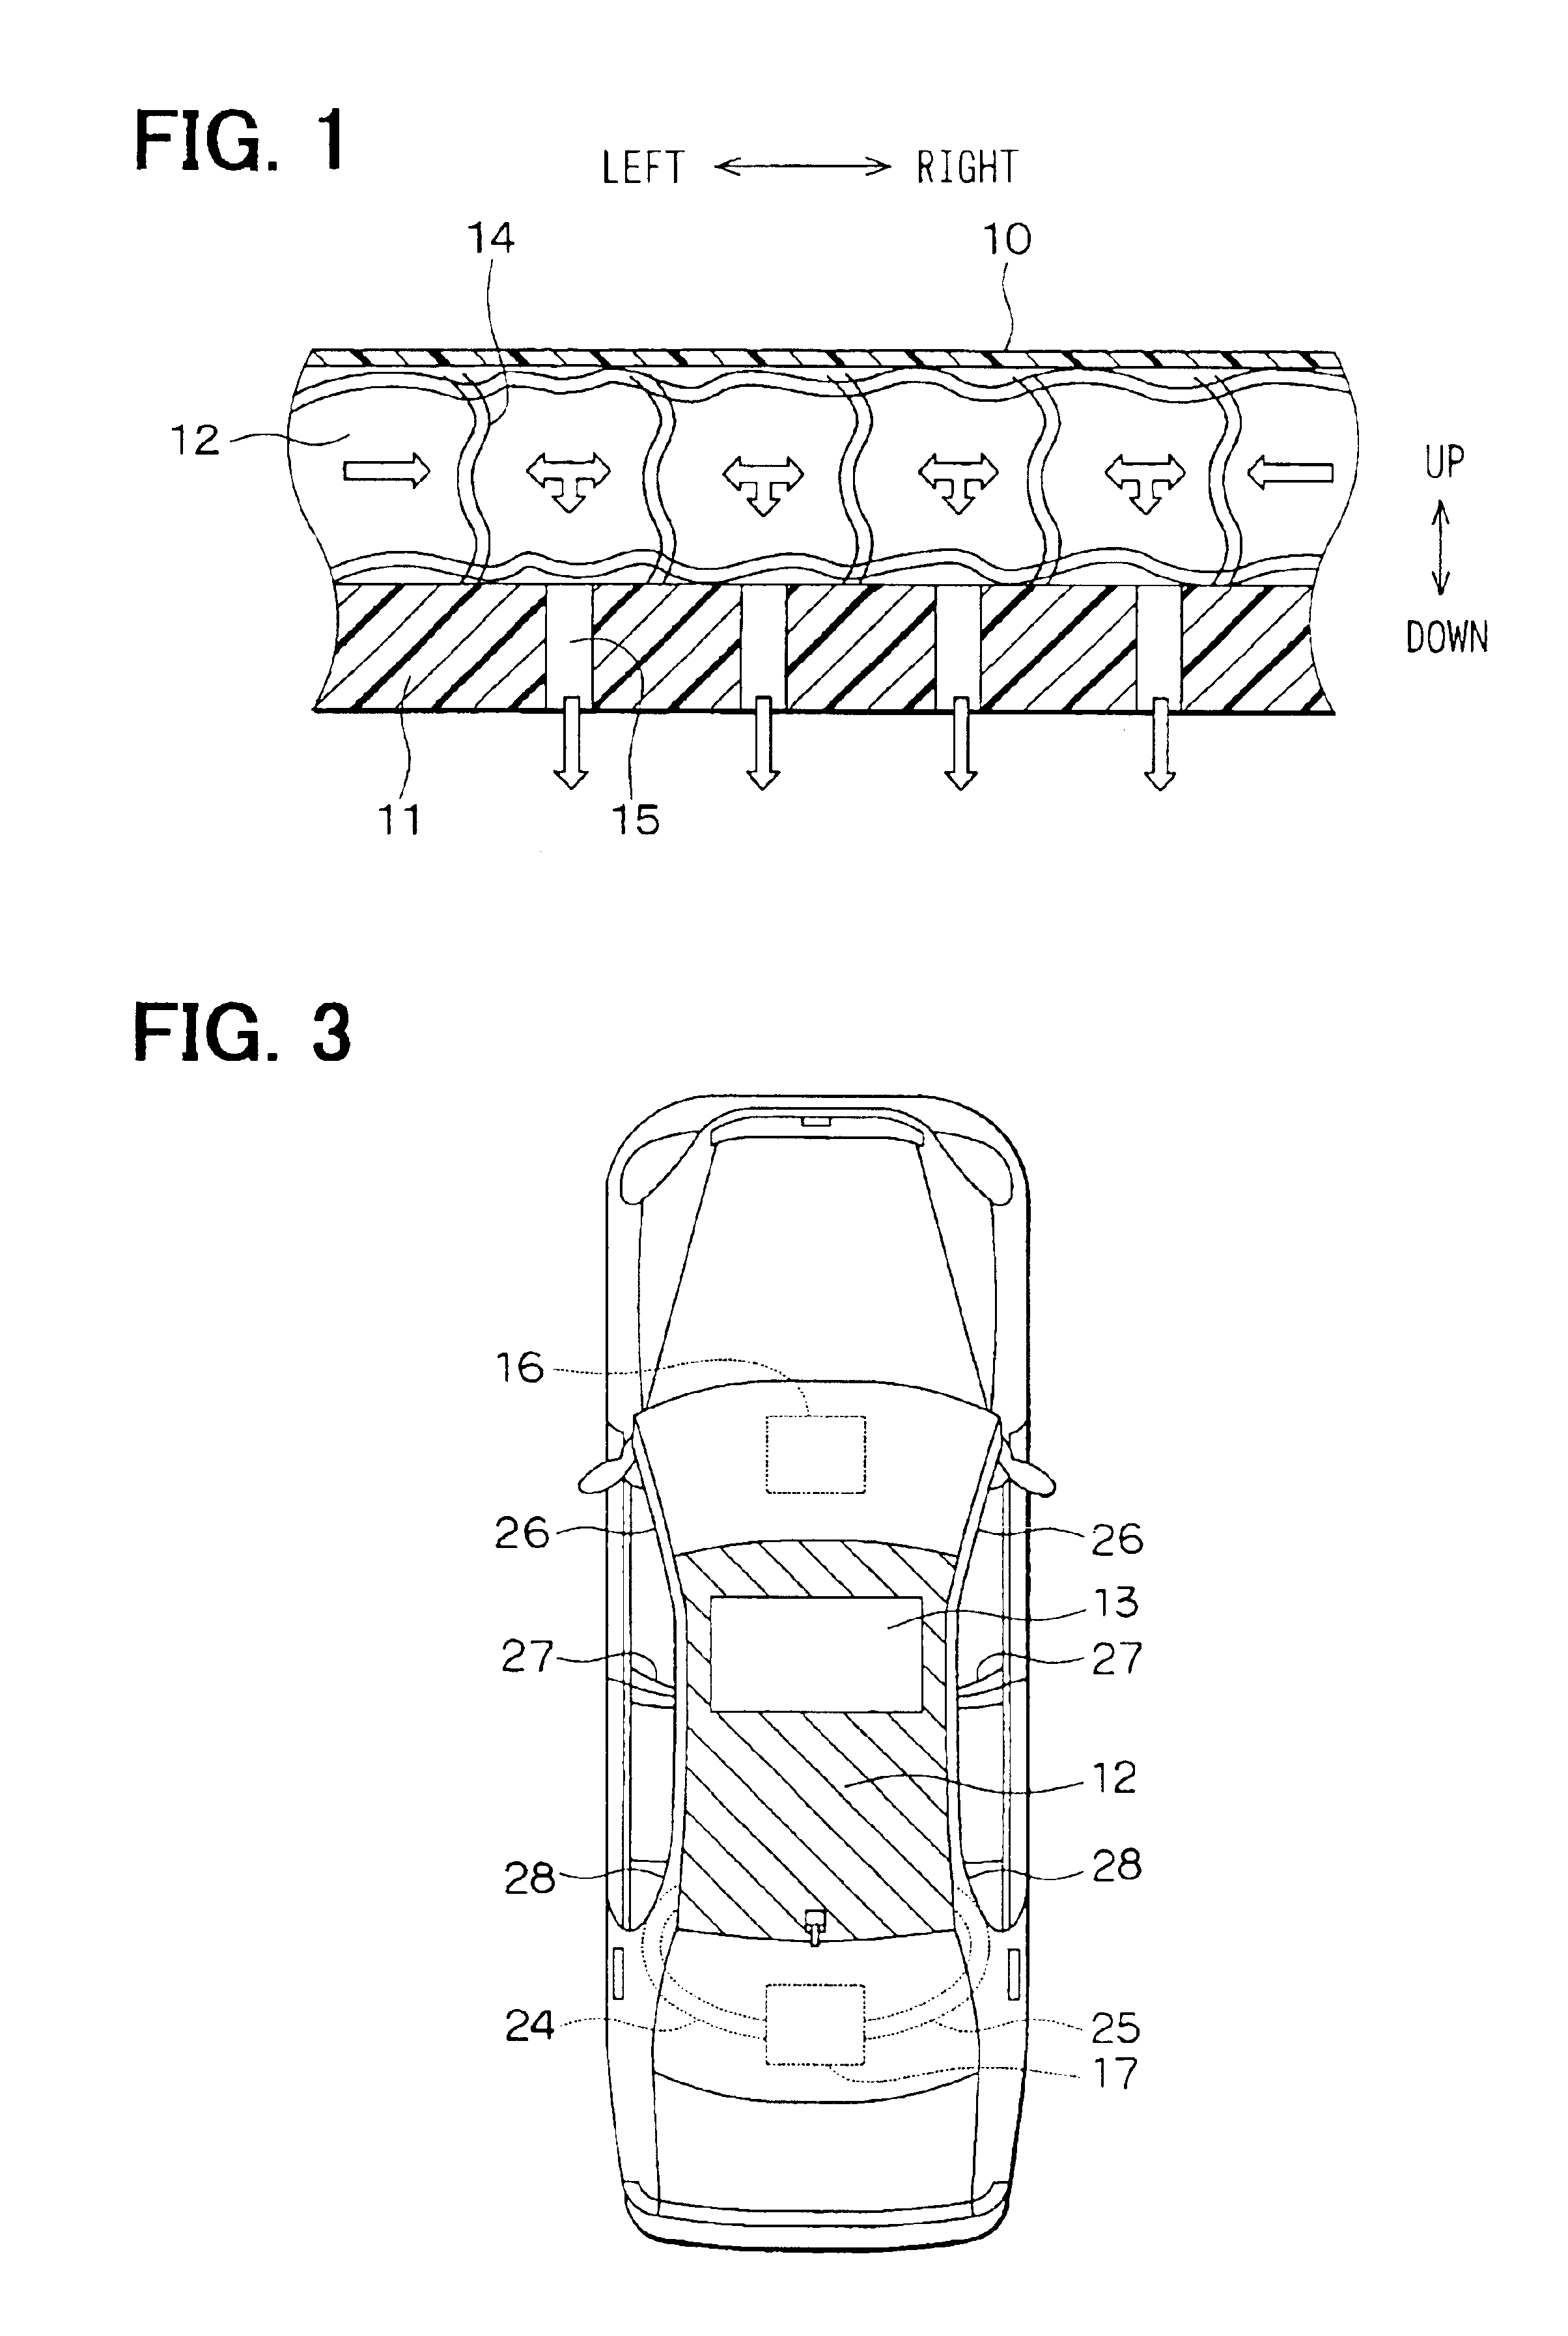 Ceiling air passage system for vehicle air conditioner